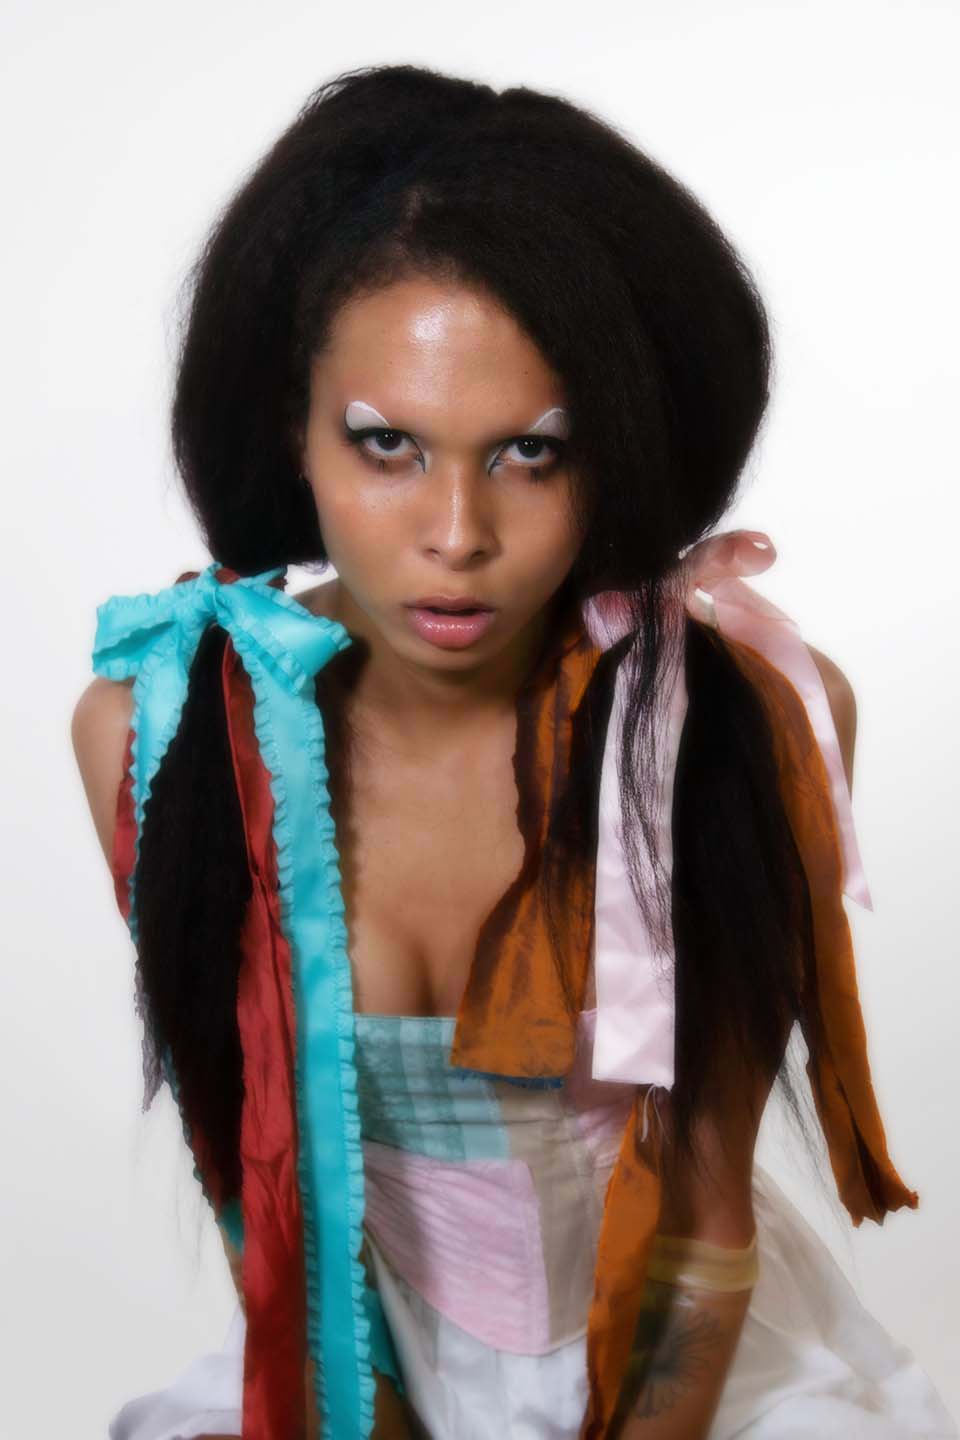 Alessa facing the camera with graphic black eyeliner on wearing a pastel corset and ribbons in her hair against a white background